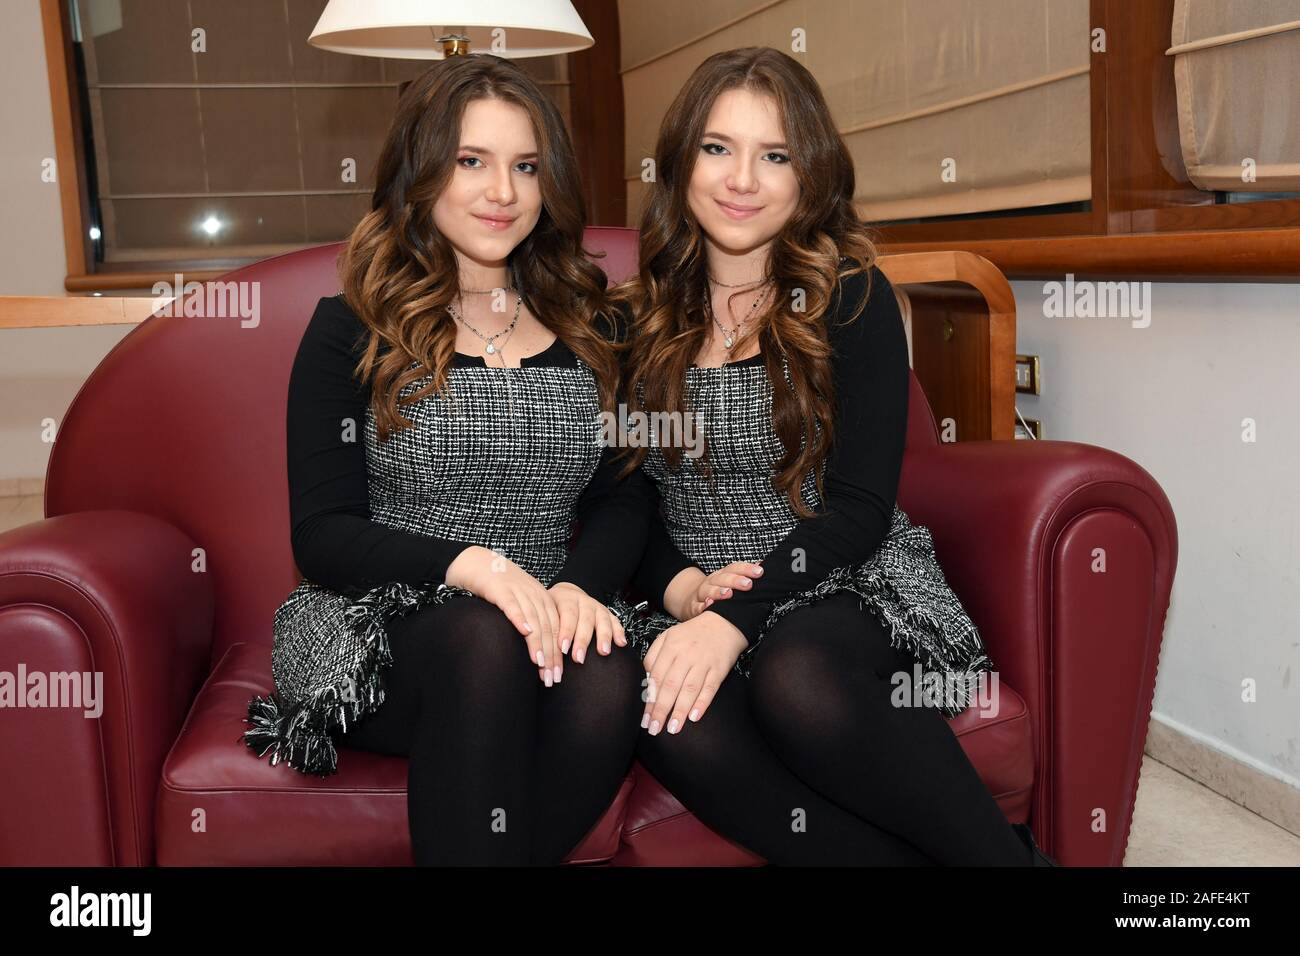 ***Minimum fee £40/$40 per picture for online use*** Bianca and Chiara D'ambrosio, better known as the D'ambrosio Twins pose for portraits at their hotel in Naples, Italy  Where: Naples, Italy When: 09 Nov 2019 Credit: IPA/WENN.com  **Only available for publication in UK, USA, Germany, Austria, Switzerland** Stock Photo